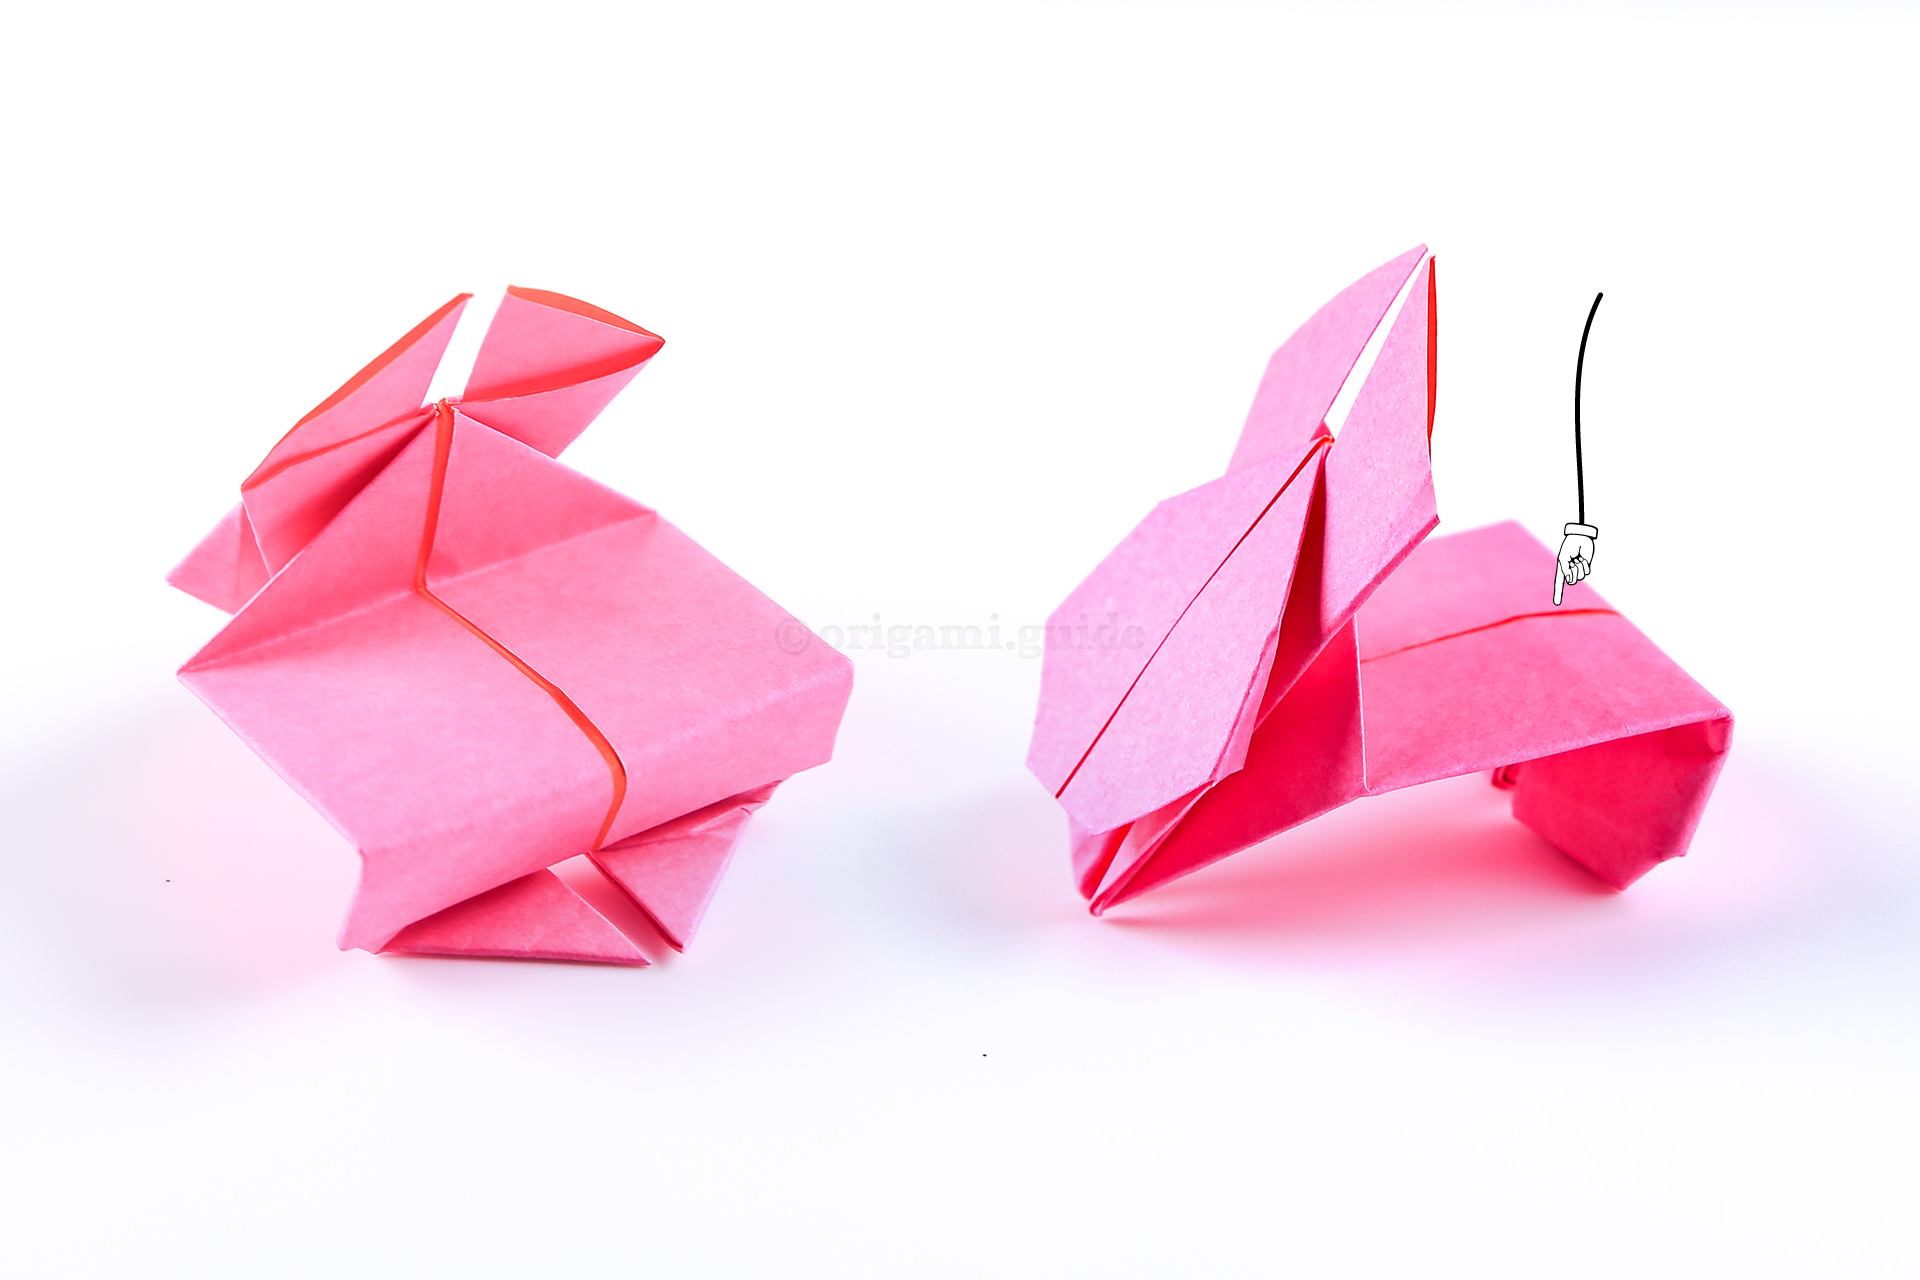 To make your origami rabbit hop, rest it on the table in this position and lightly swipe the rabbits bottom!